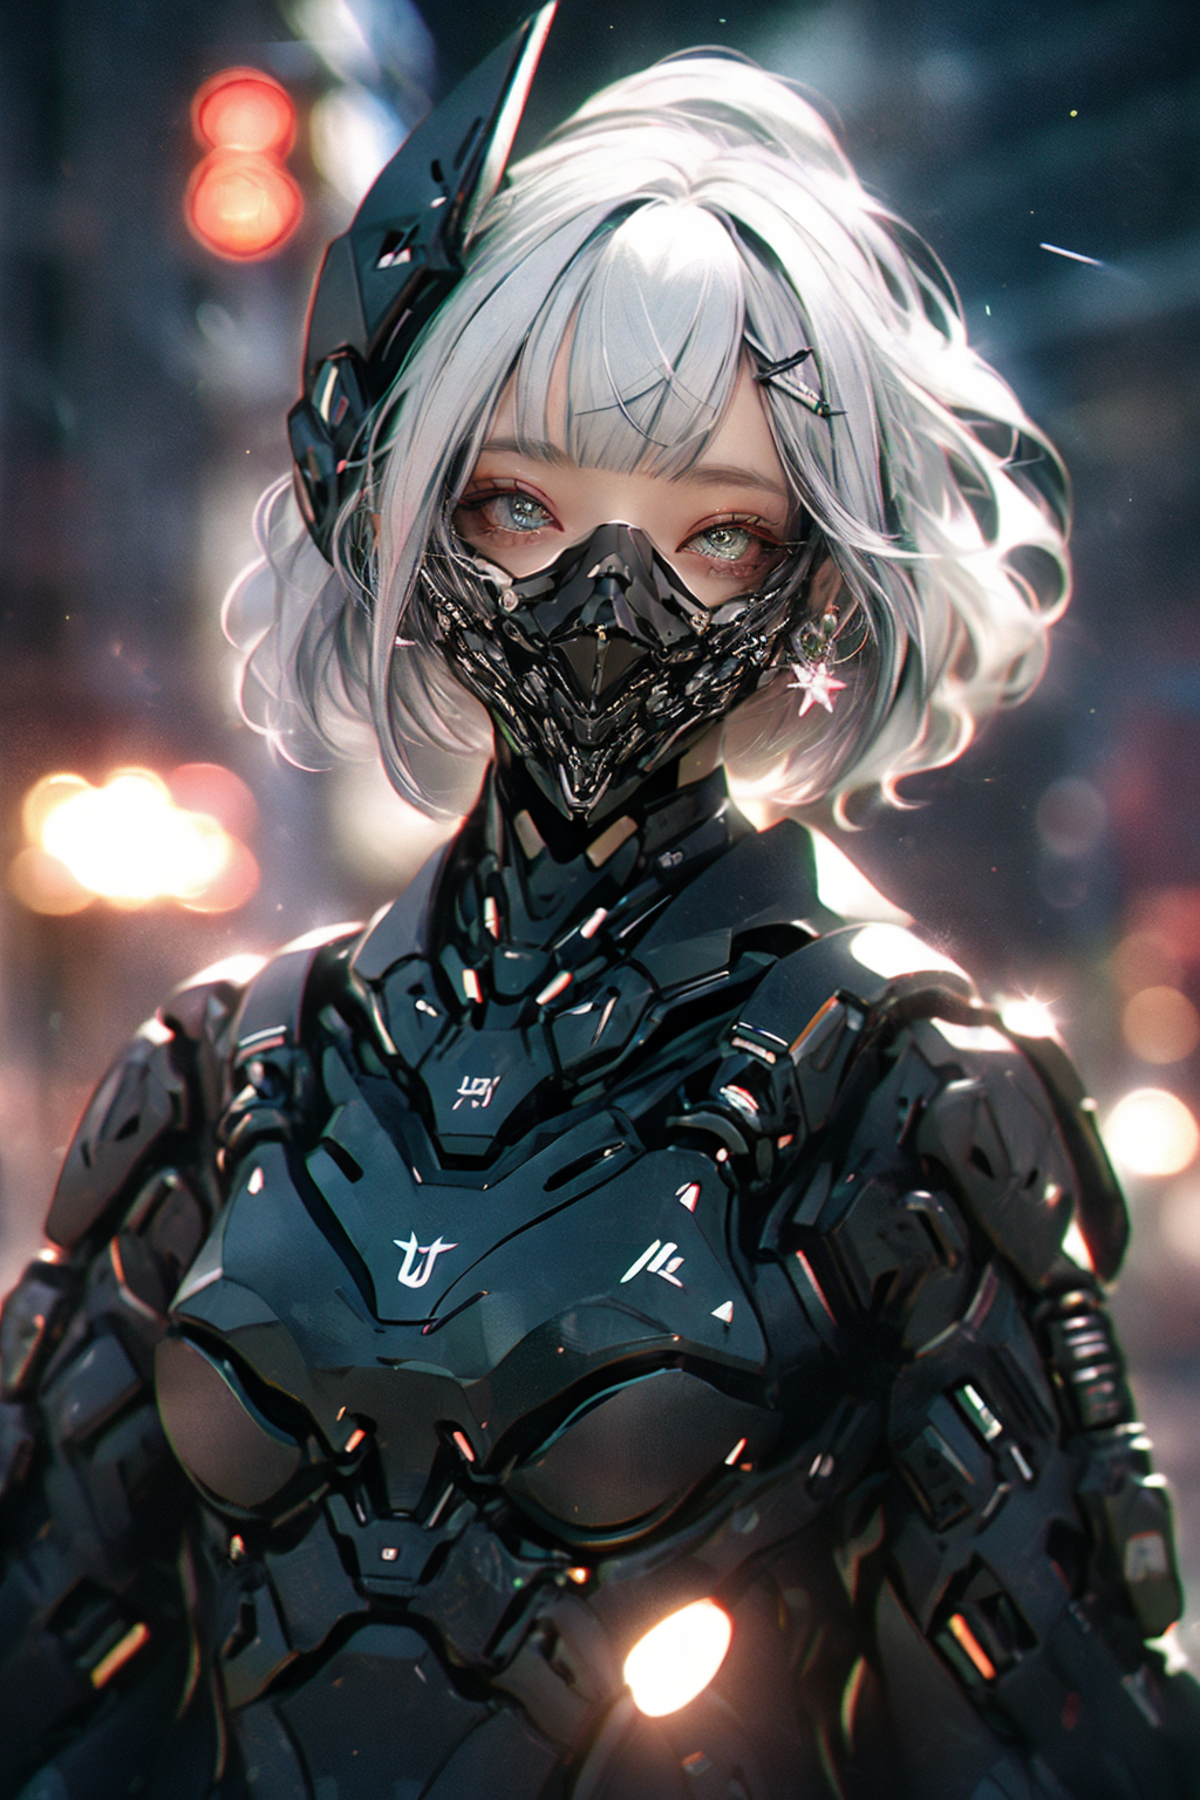 Mecharobot | Clothing + action Style | image by 0_vortex